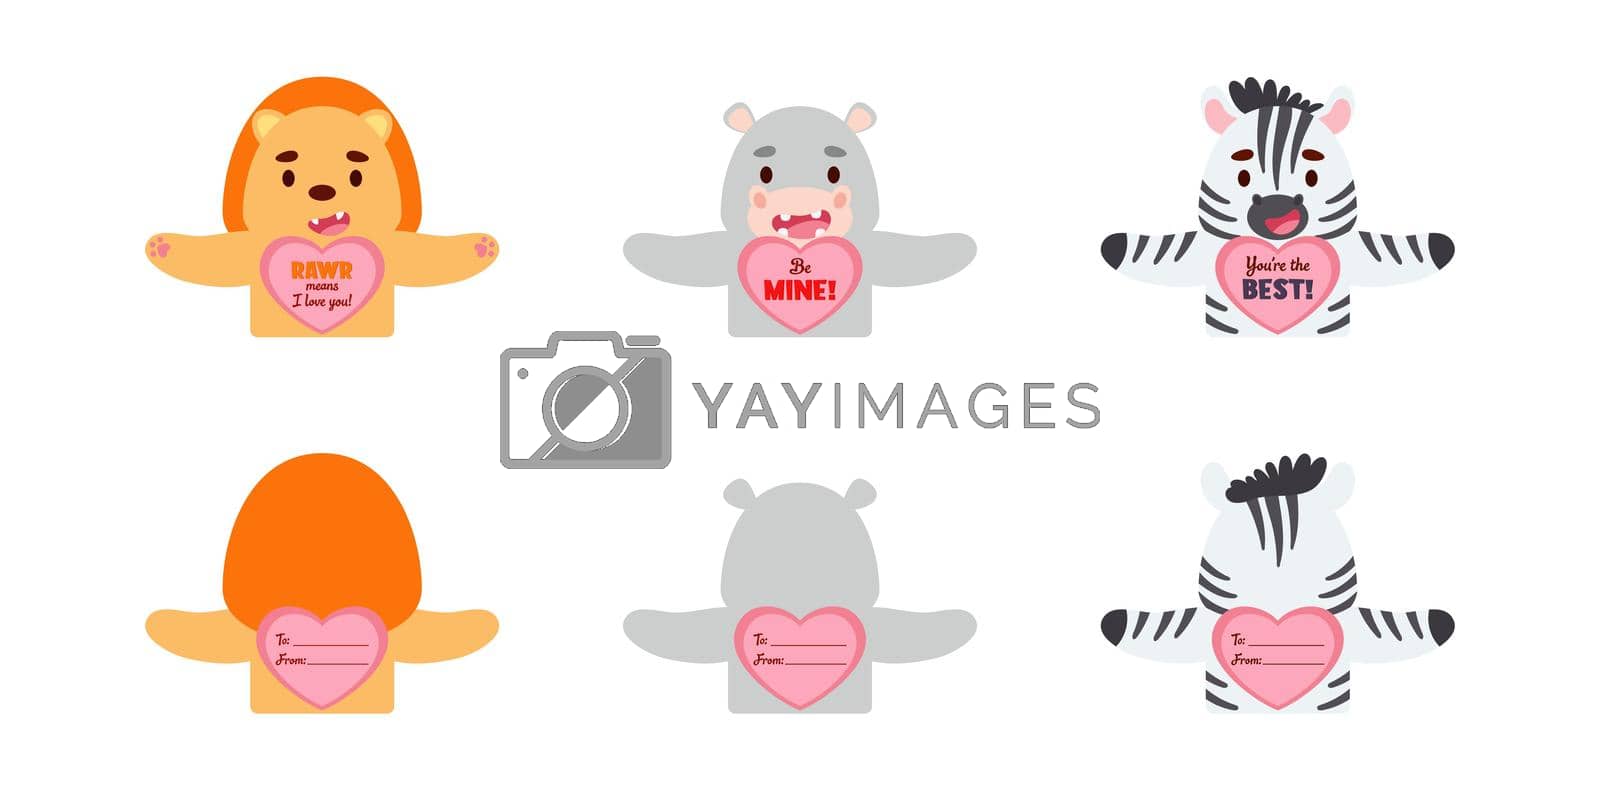 Royalty free image of Valentines Day cute animal gift cards candy holder cards for kids. Great gift option school classroom prizes, gift exchange, Valentine party favors, love notes and more. Vector stock illustration by Melnyk